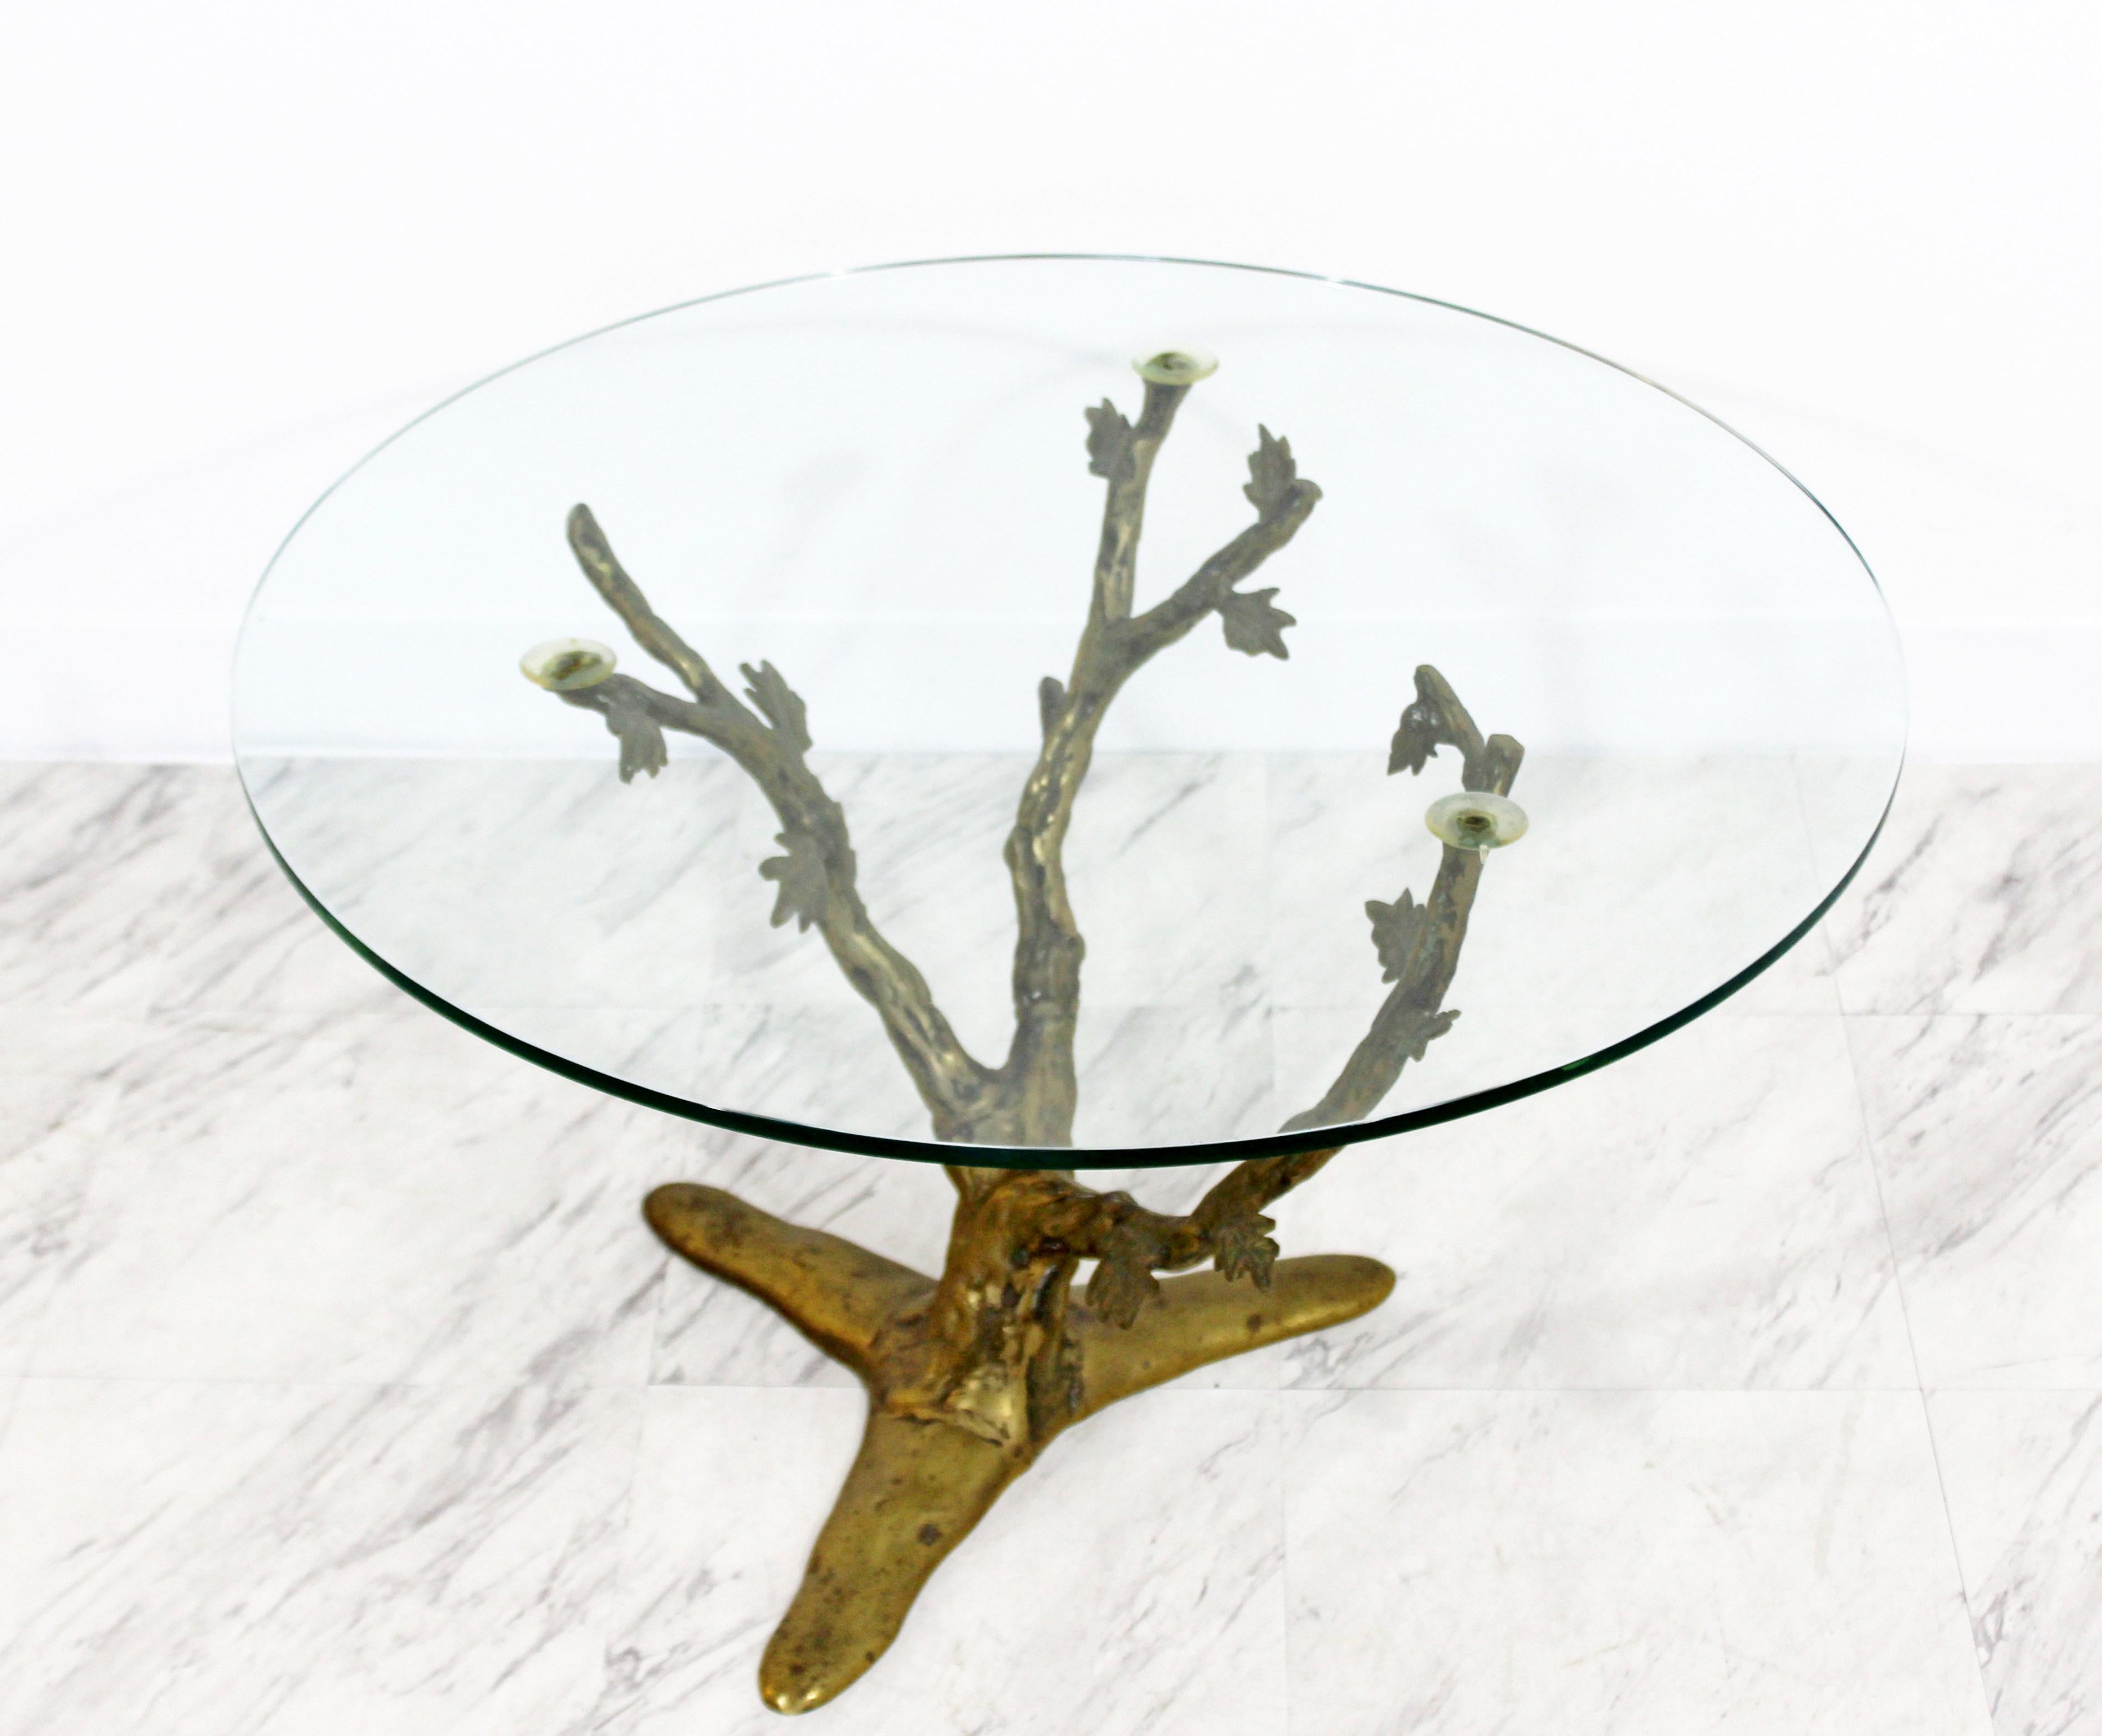 For your consideration is a fantastic cast bronze side or end table, with a three limb branch base, and a round glass top. In excellent condition. The dimensions are 28